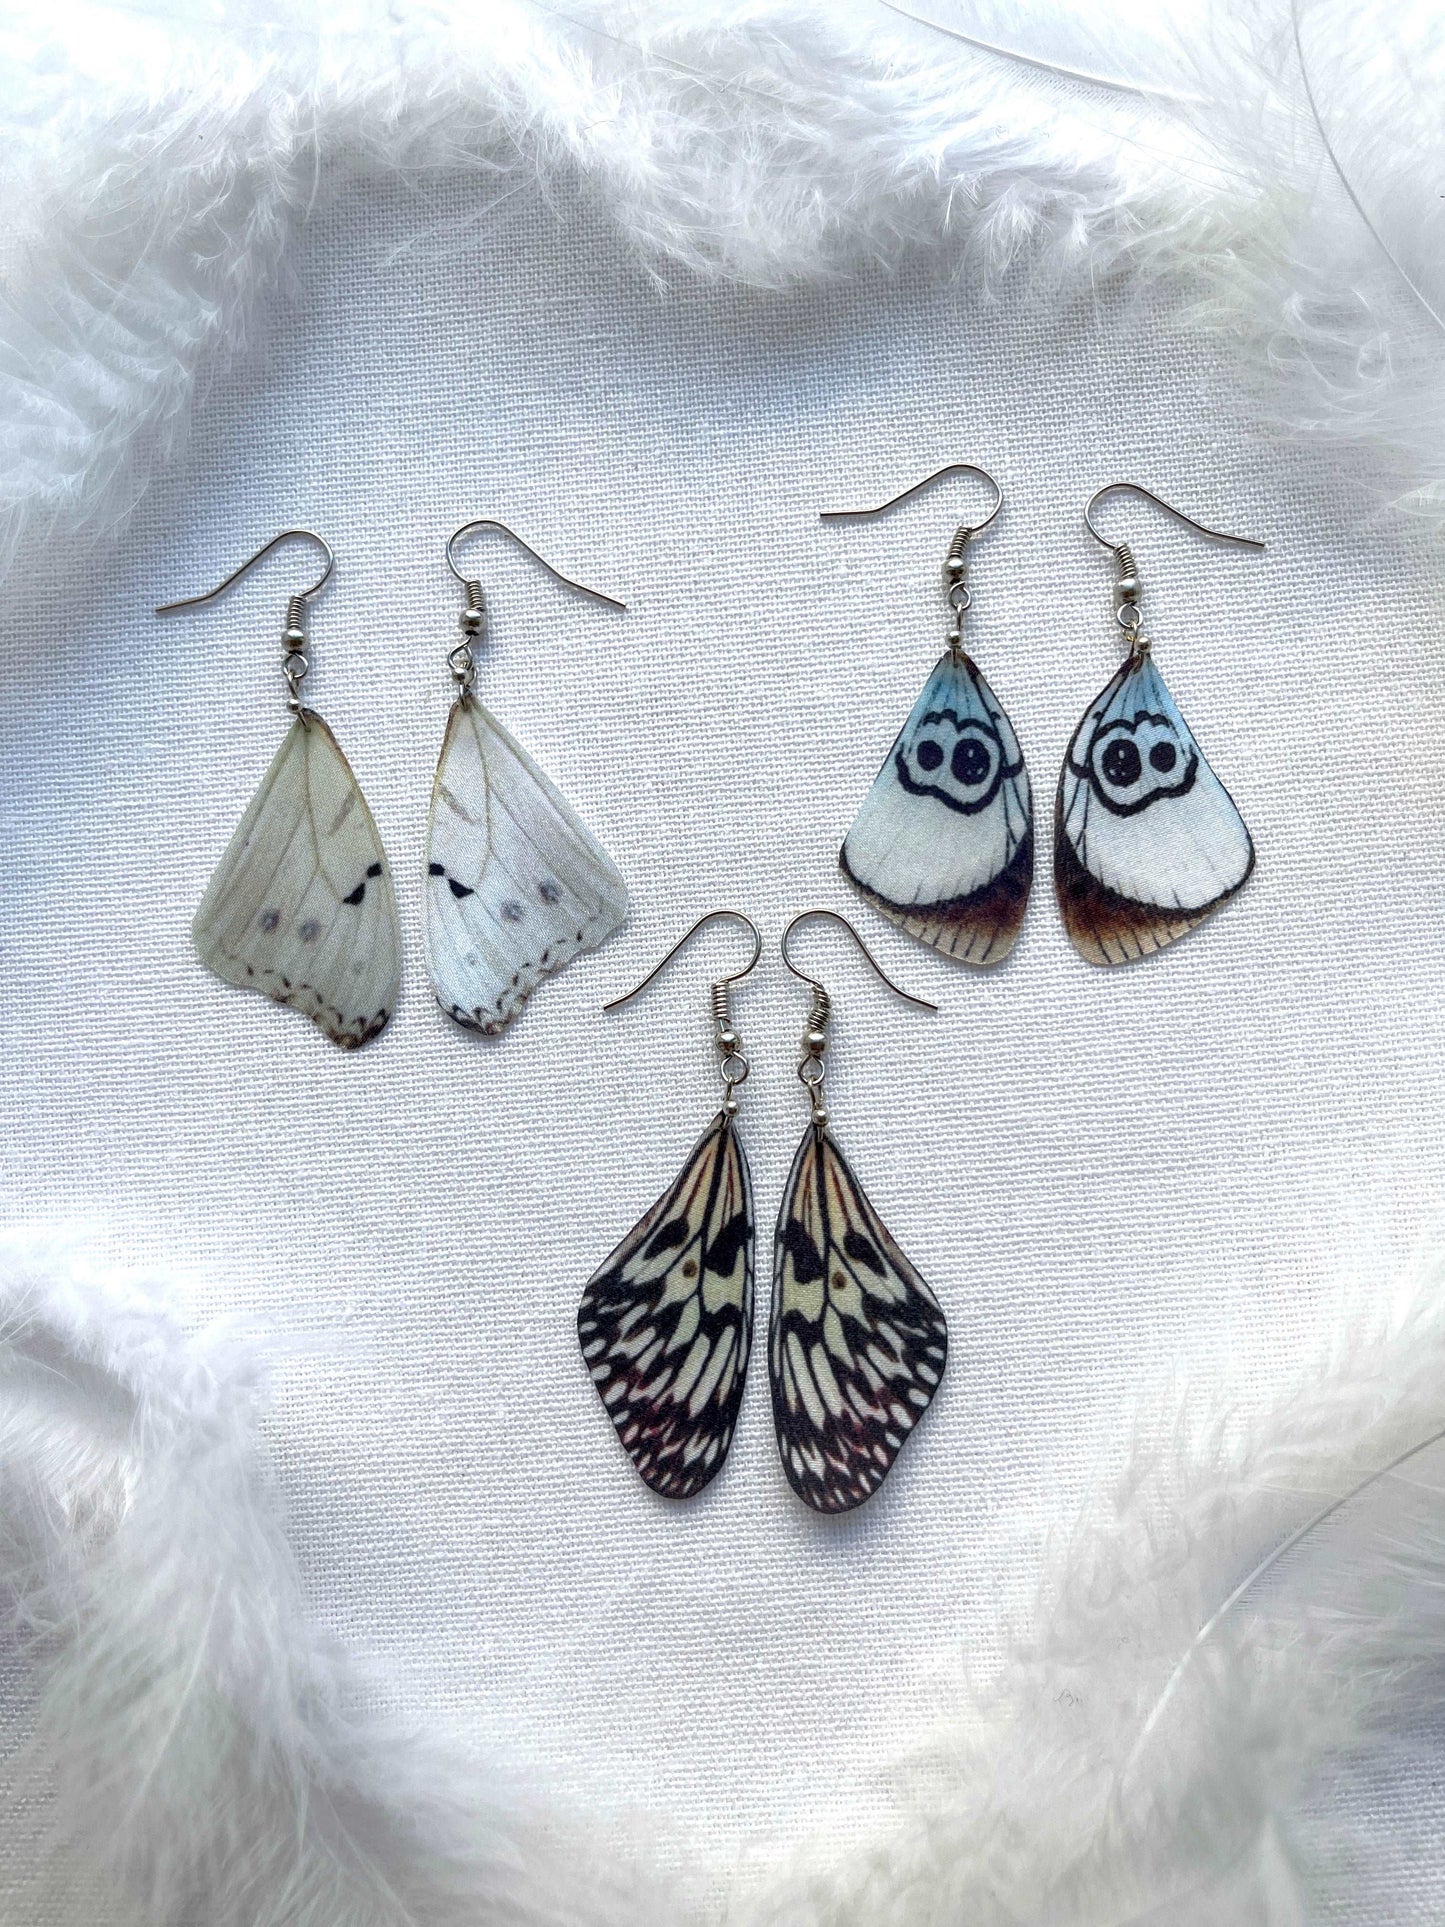 Fairy Earrings with Intricate Butterfly Wings and Boho Style